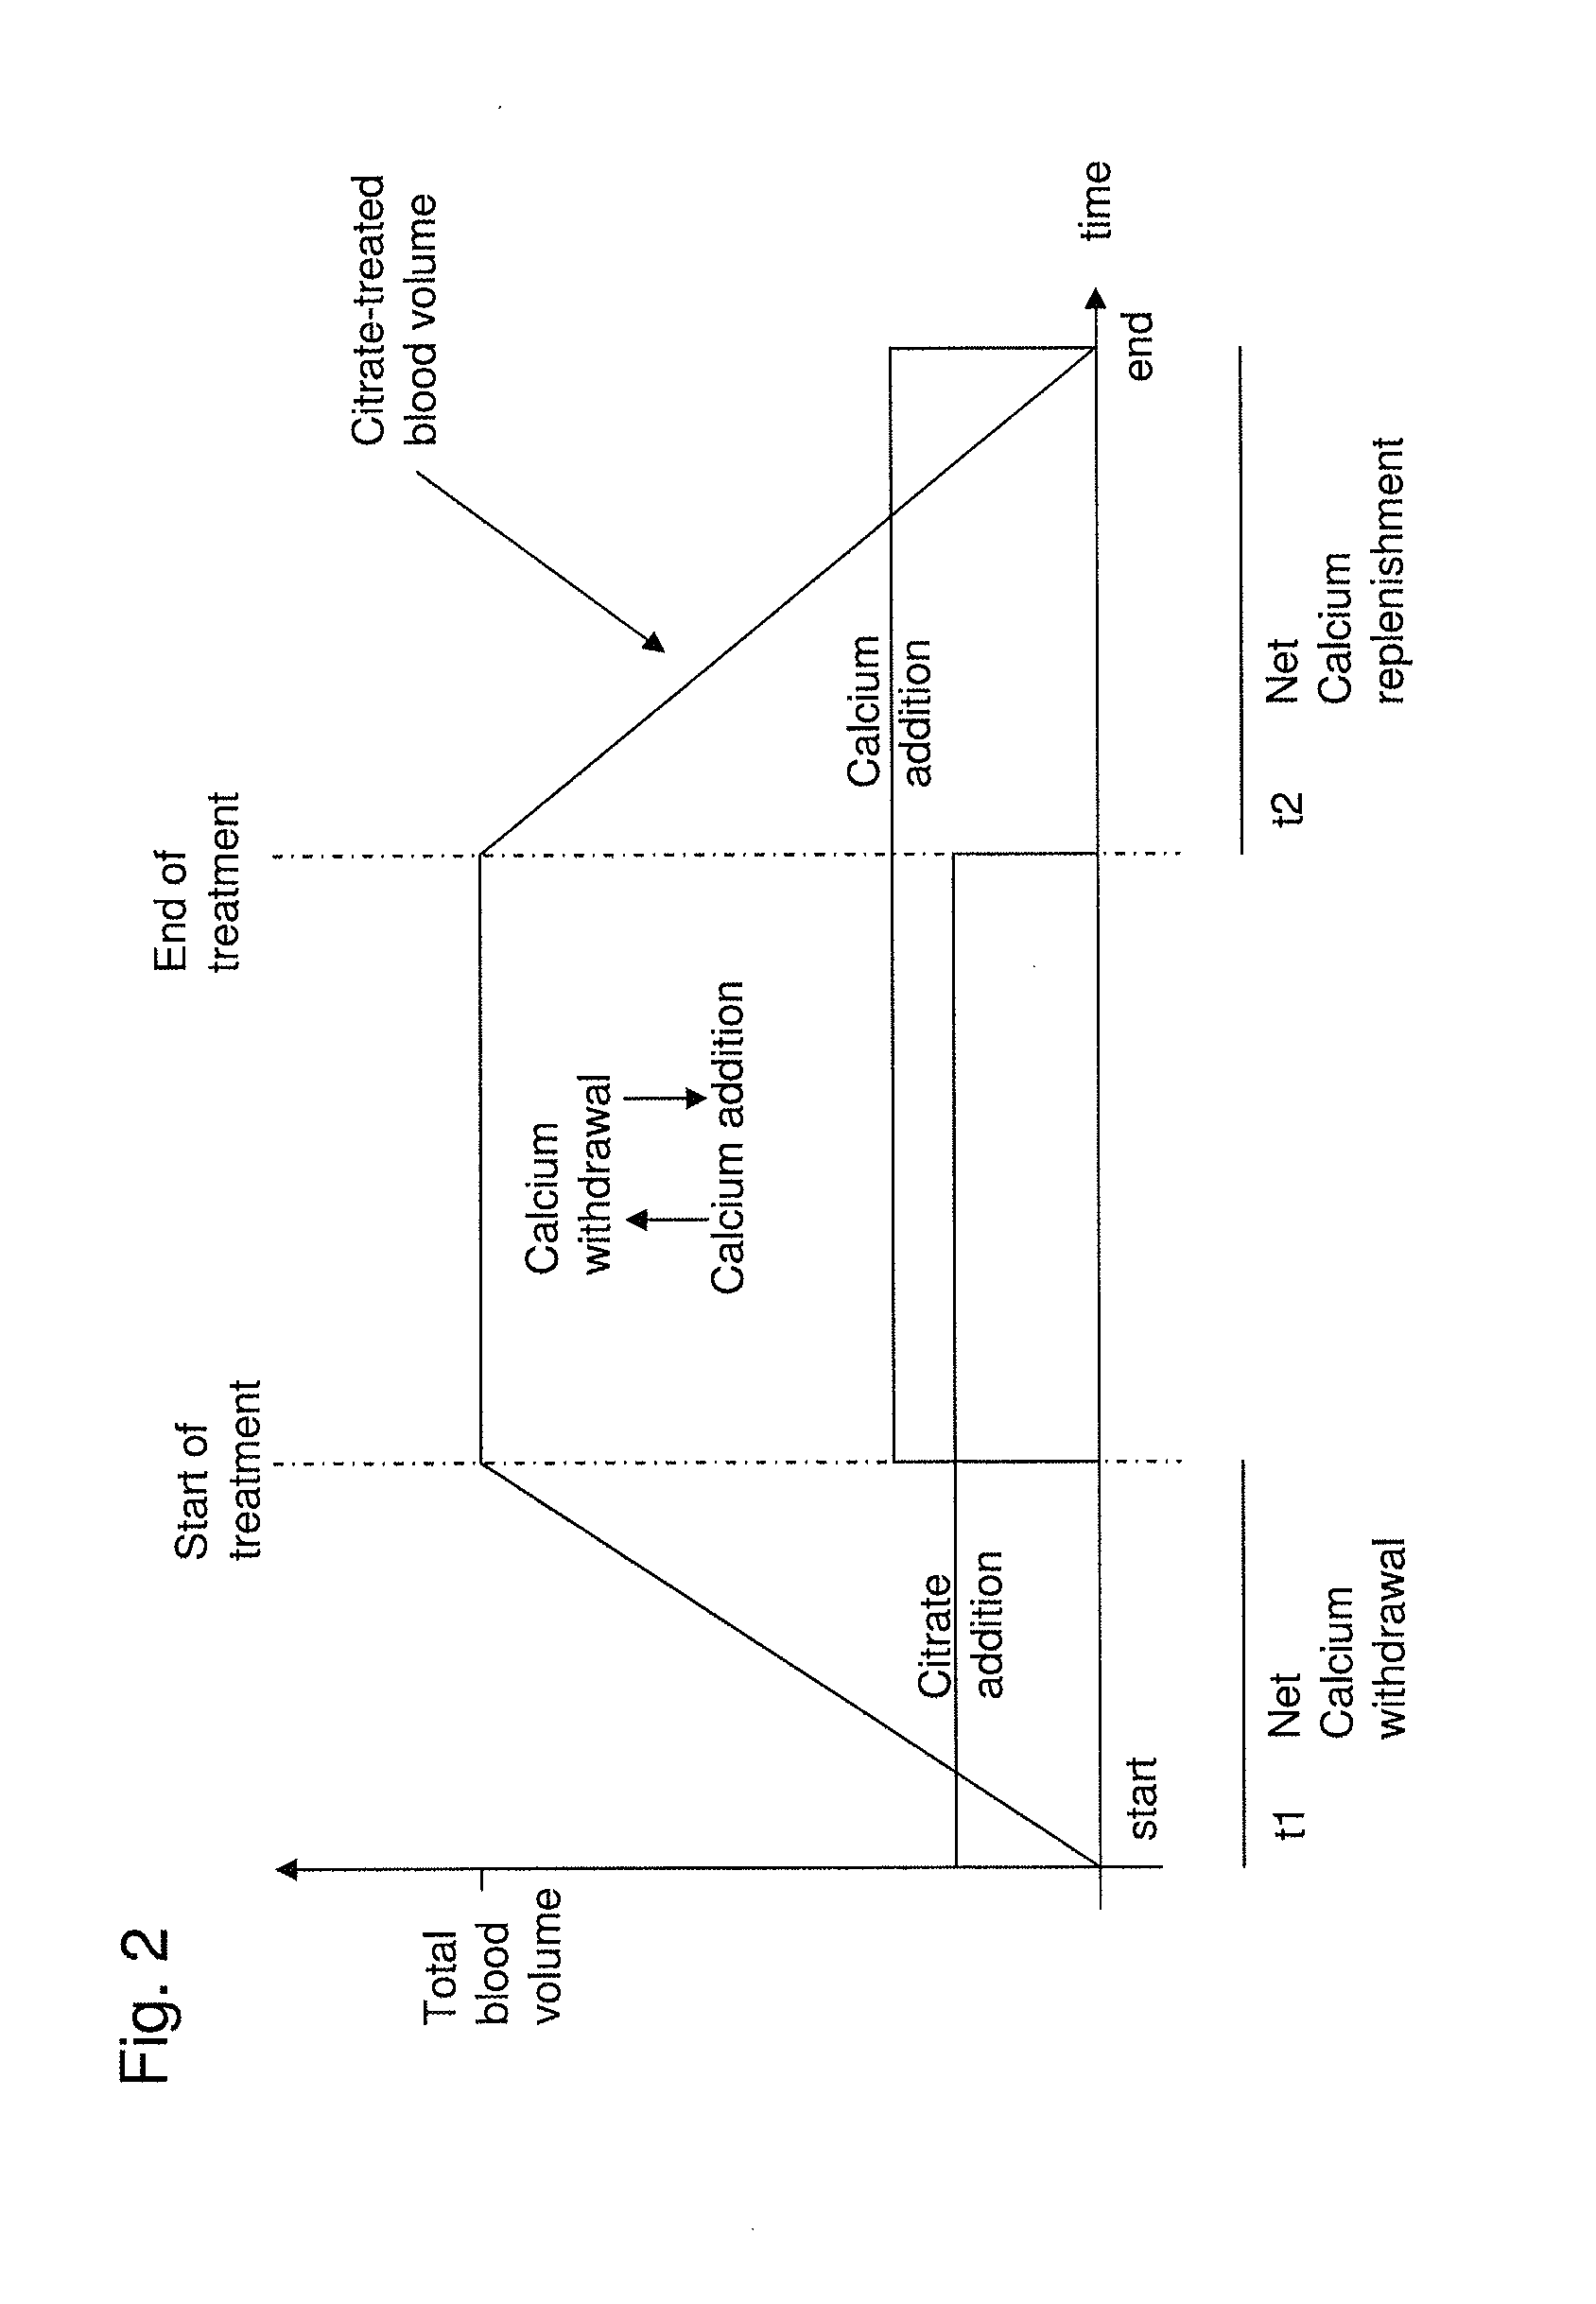 System and method for flexible citrate anticoagulation during extracorporeal blood treatment using feed-forward control